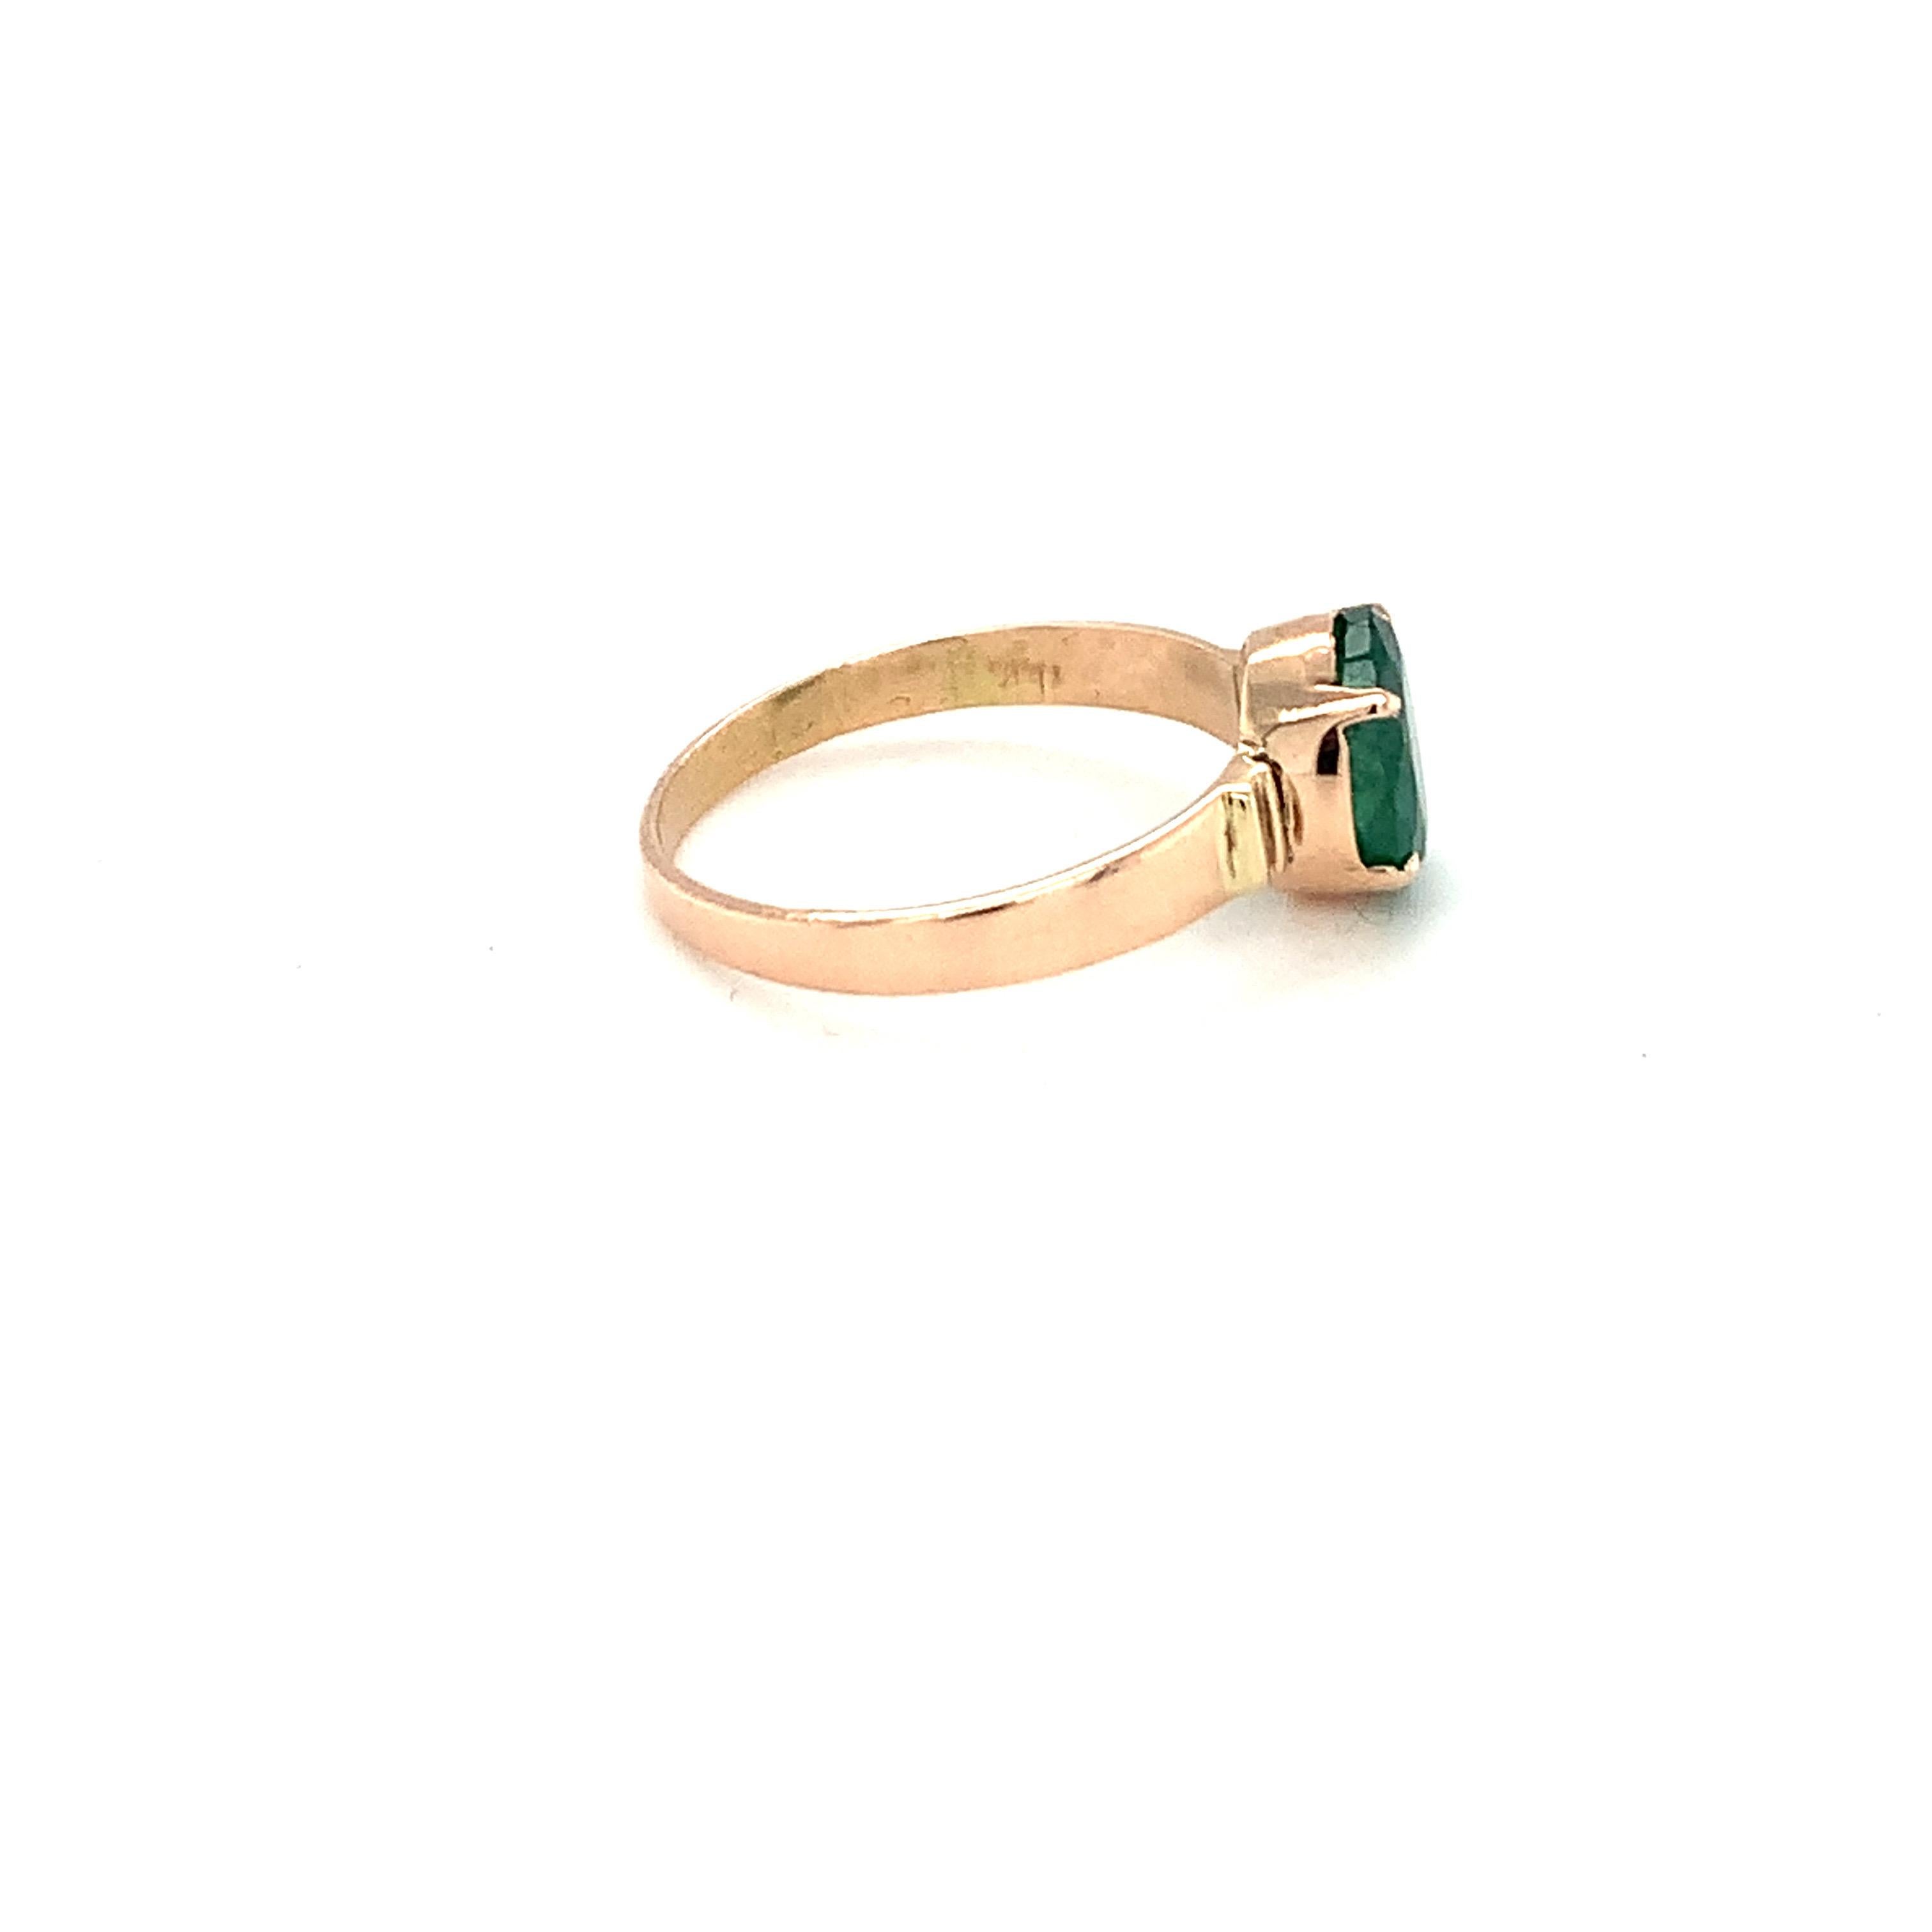 Hand cut and polished natural emerald ring is crafted with hand in 14K yellow gold. 
Ideal for daily casual wear.
Image is enlarged for a closer look
Ethically sourced natural gem stone.